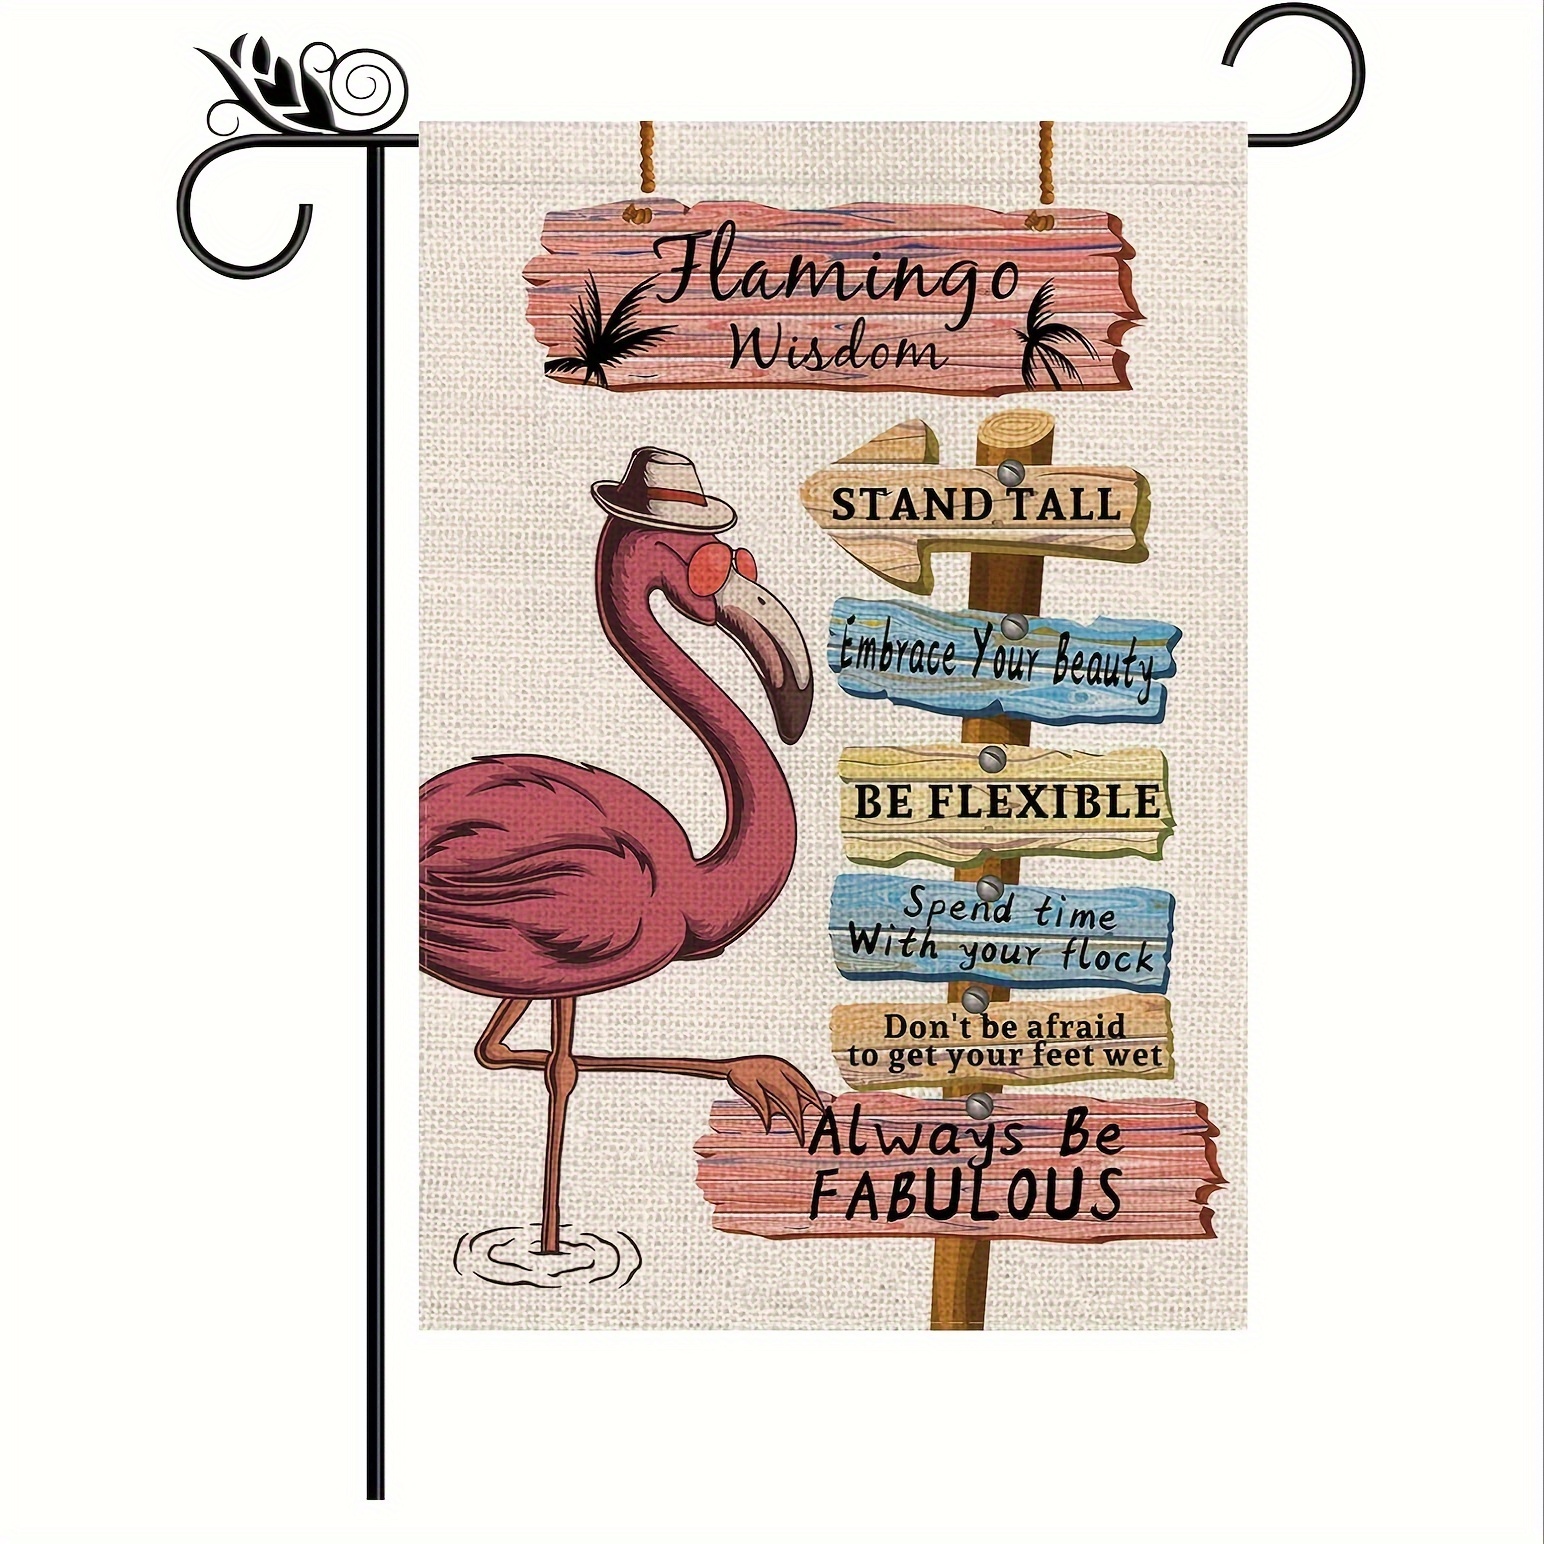 

Flamingo Wisdom Double-sided Garden Flag - 12.5" X 18" Outdoor Pool Rules & Summer Party Decor, Durable Polyester